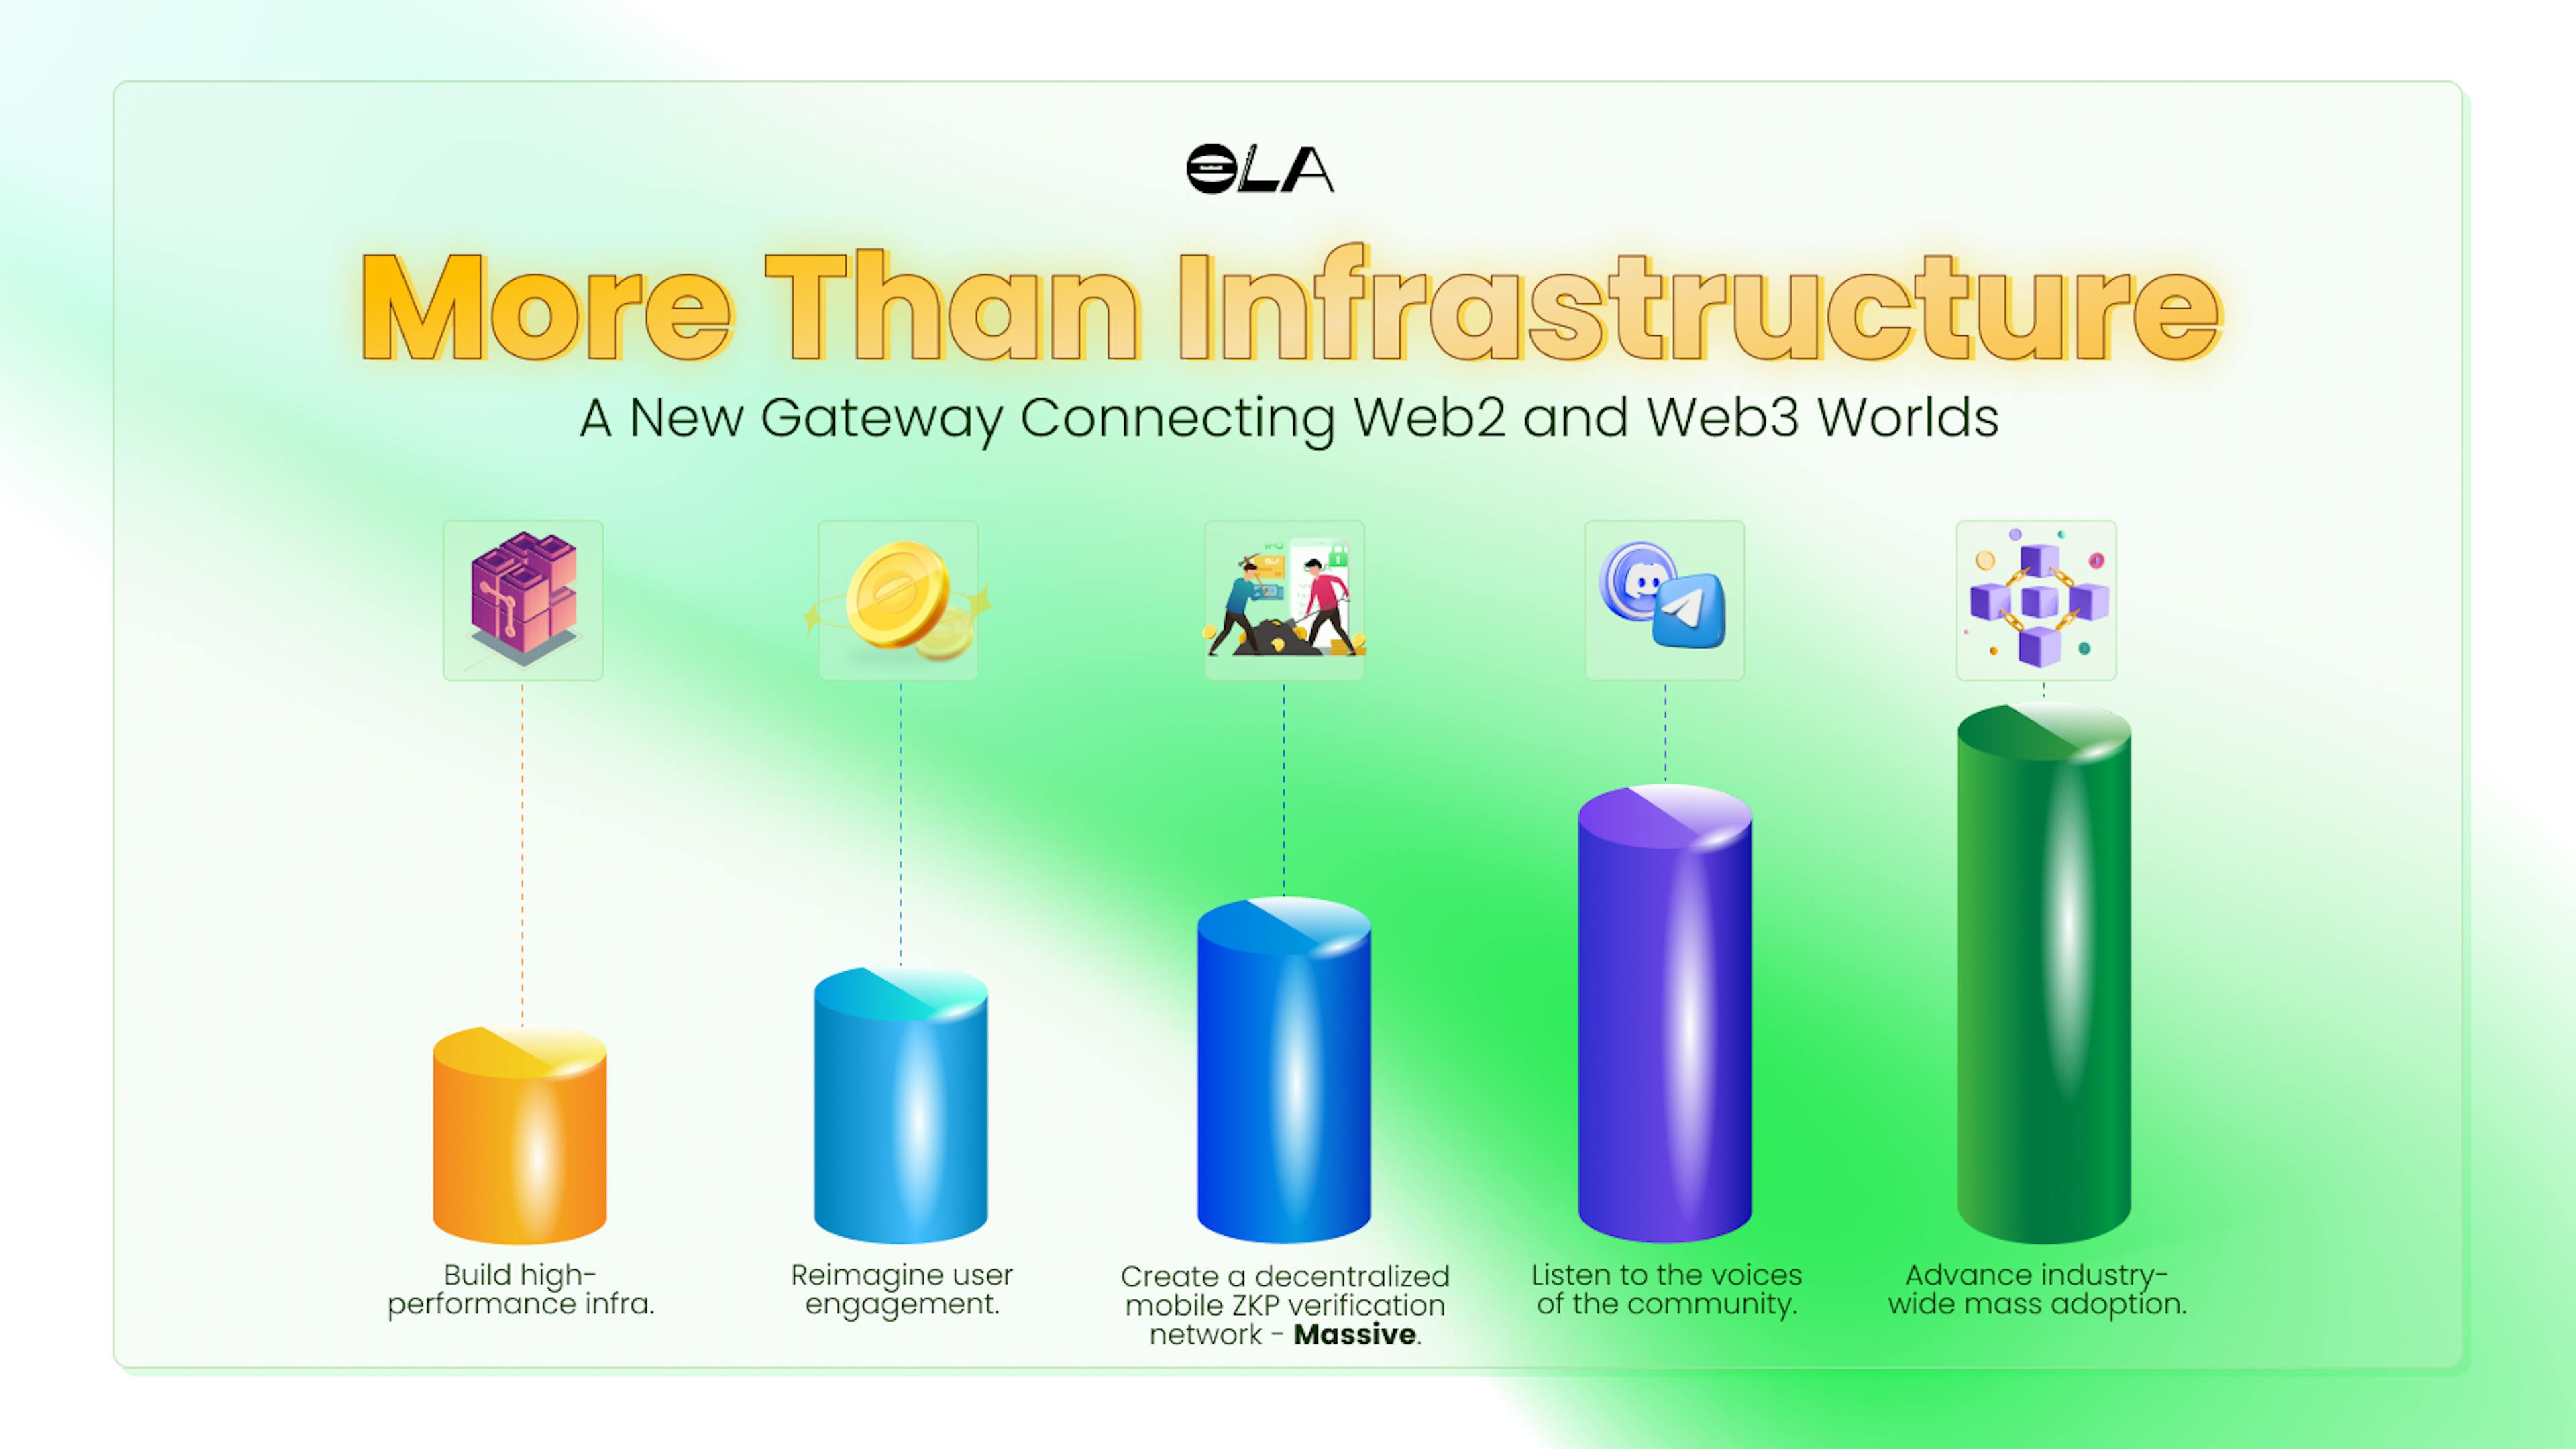 featured image - Ola: More Than Infrastructure - A New Gateway Connecting Web2 and Web3 Worlds